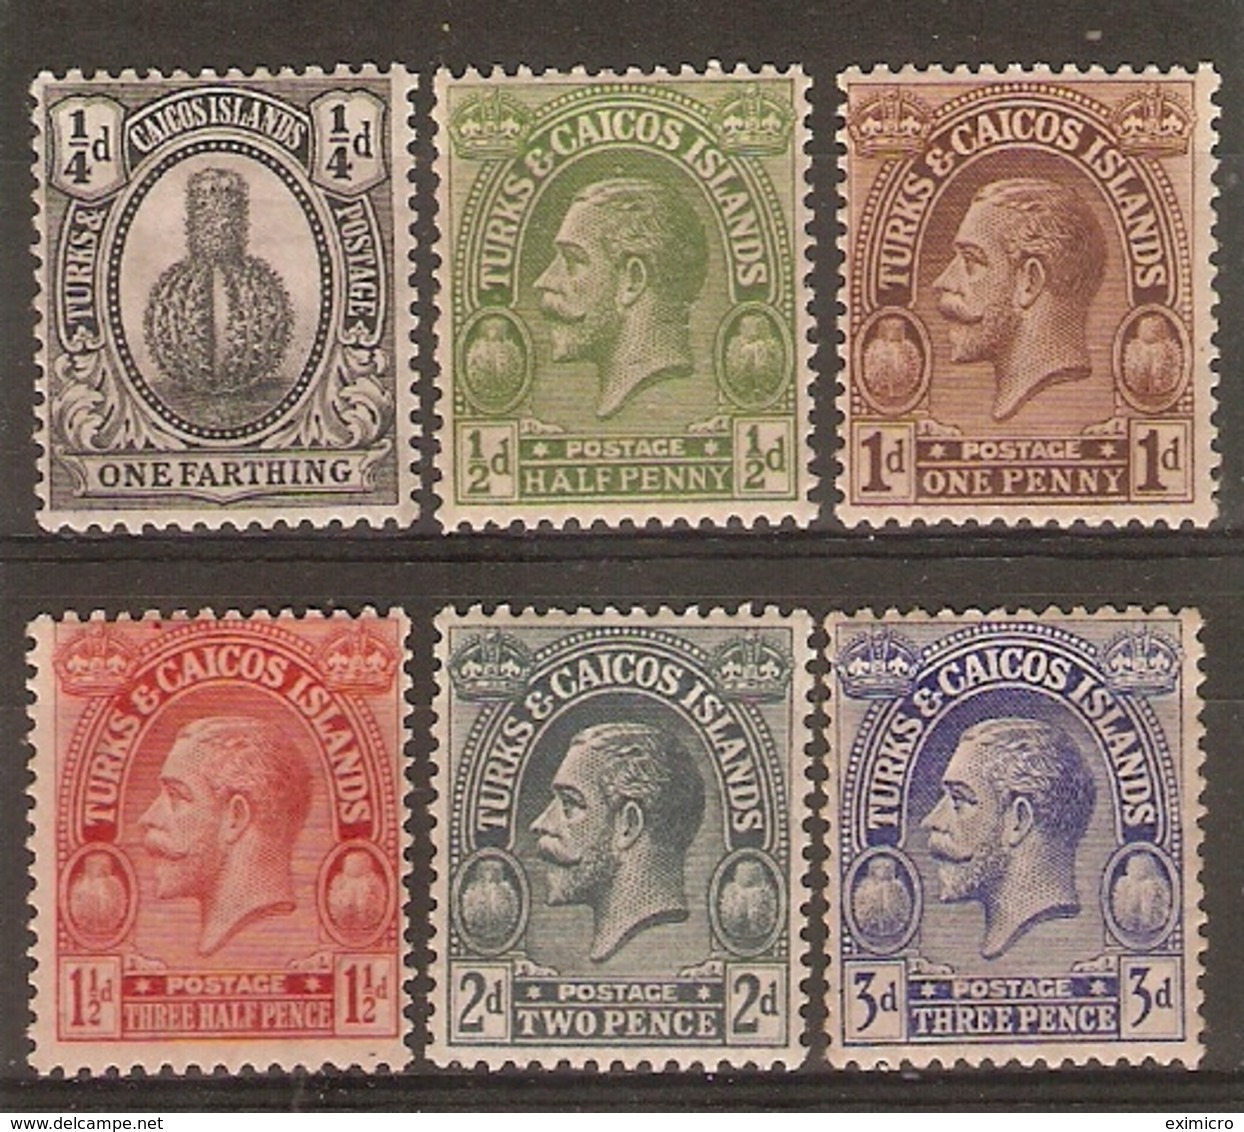 TURKS & CAICOS IS 1922 SET TO 2d + 3d SG 162/166 & 168 MOUNTED MINT Cat £17.50 - Turks & Caicos